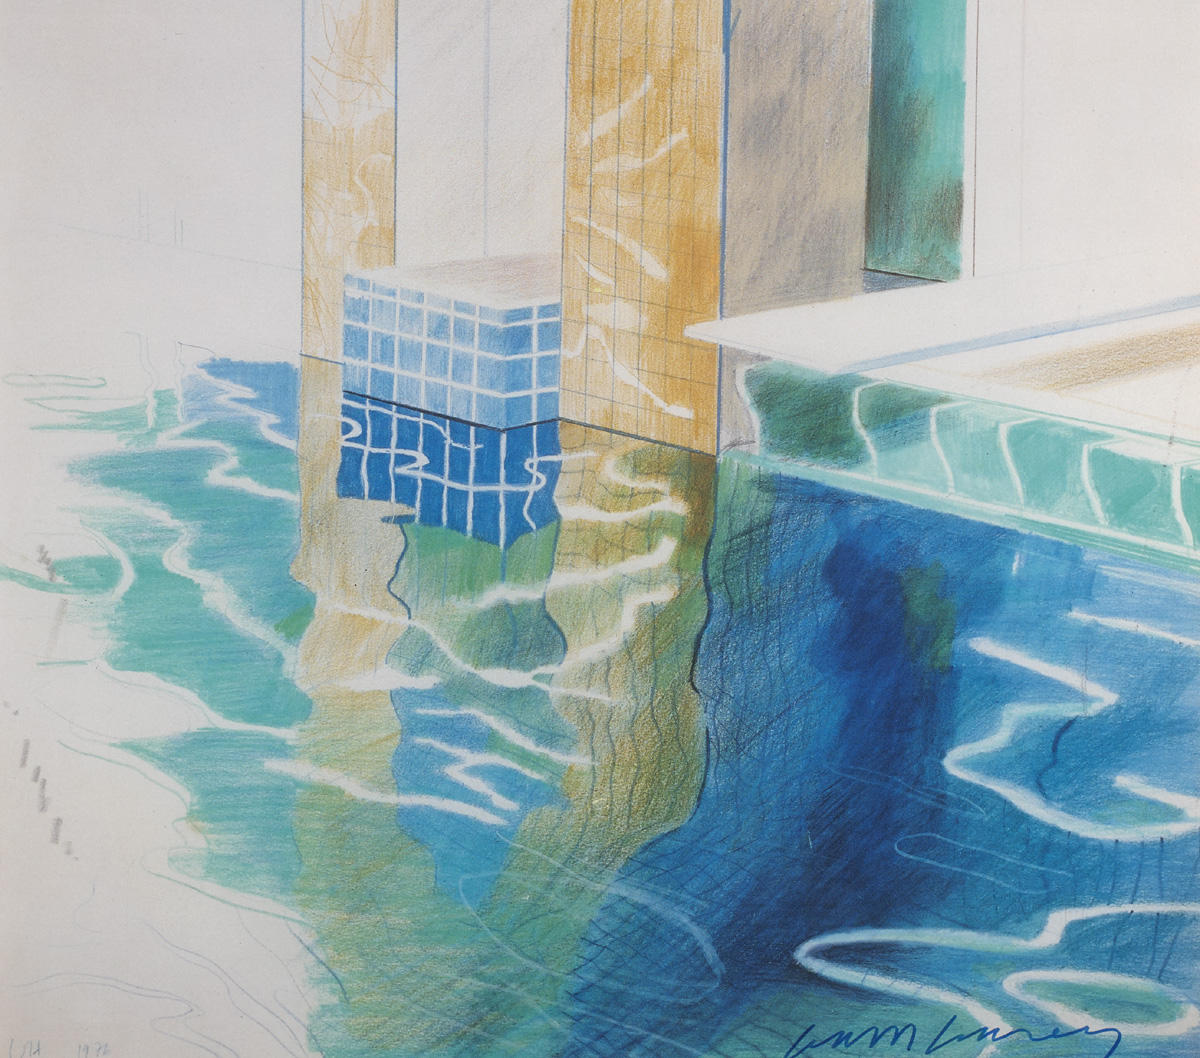 David Hockney RA (British, b.1937) POOL, 1976 offset lithographic print signed in blue ink lower